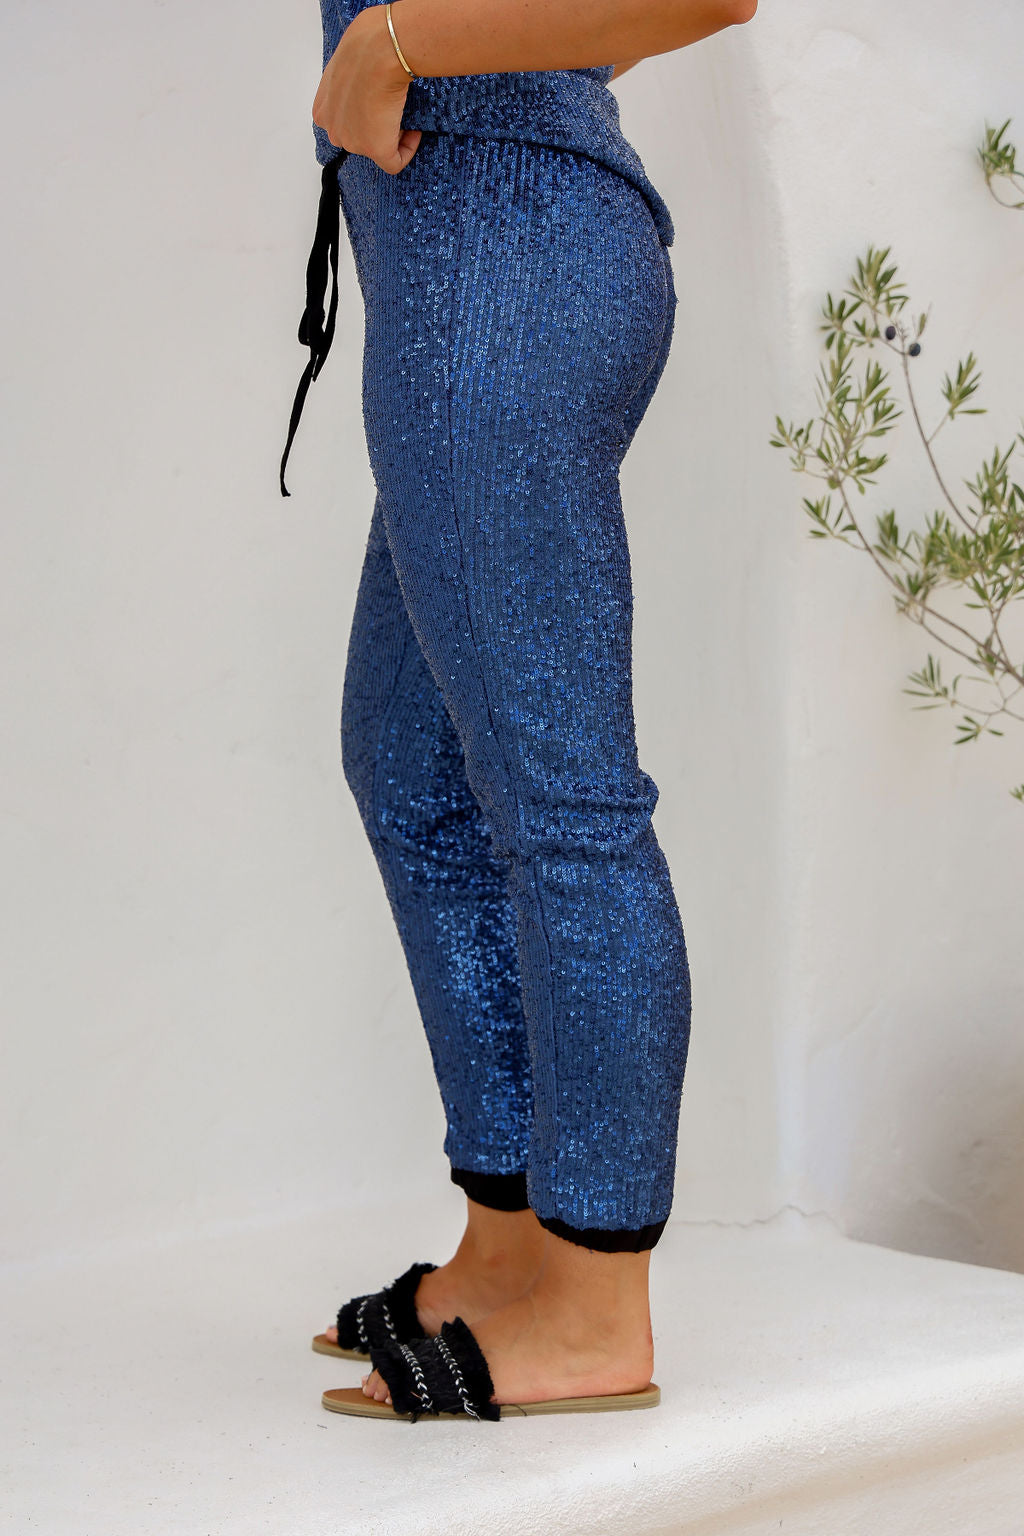 Accecante Pants - Navy